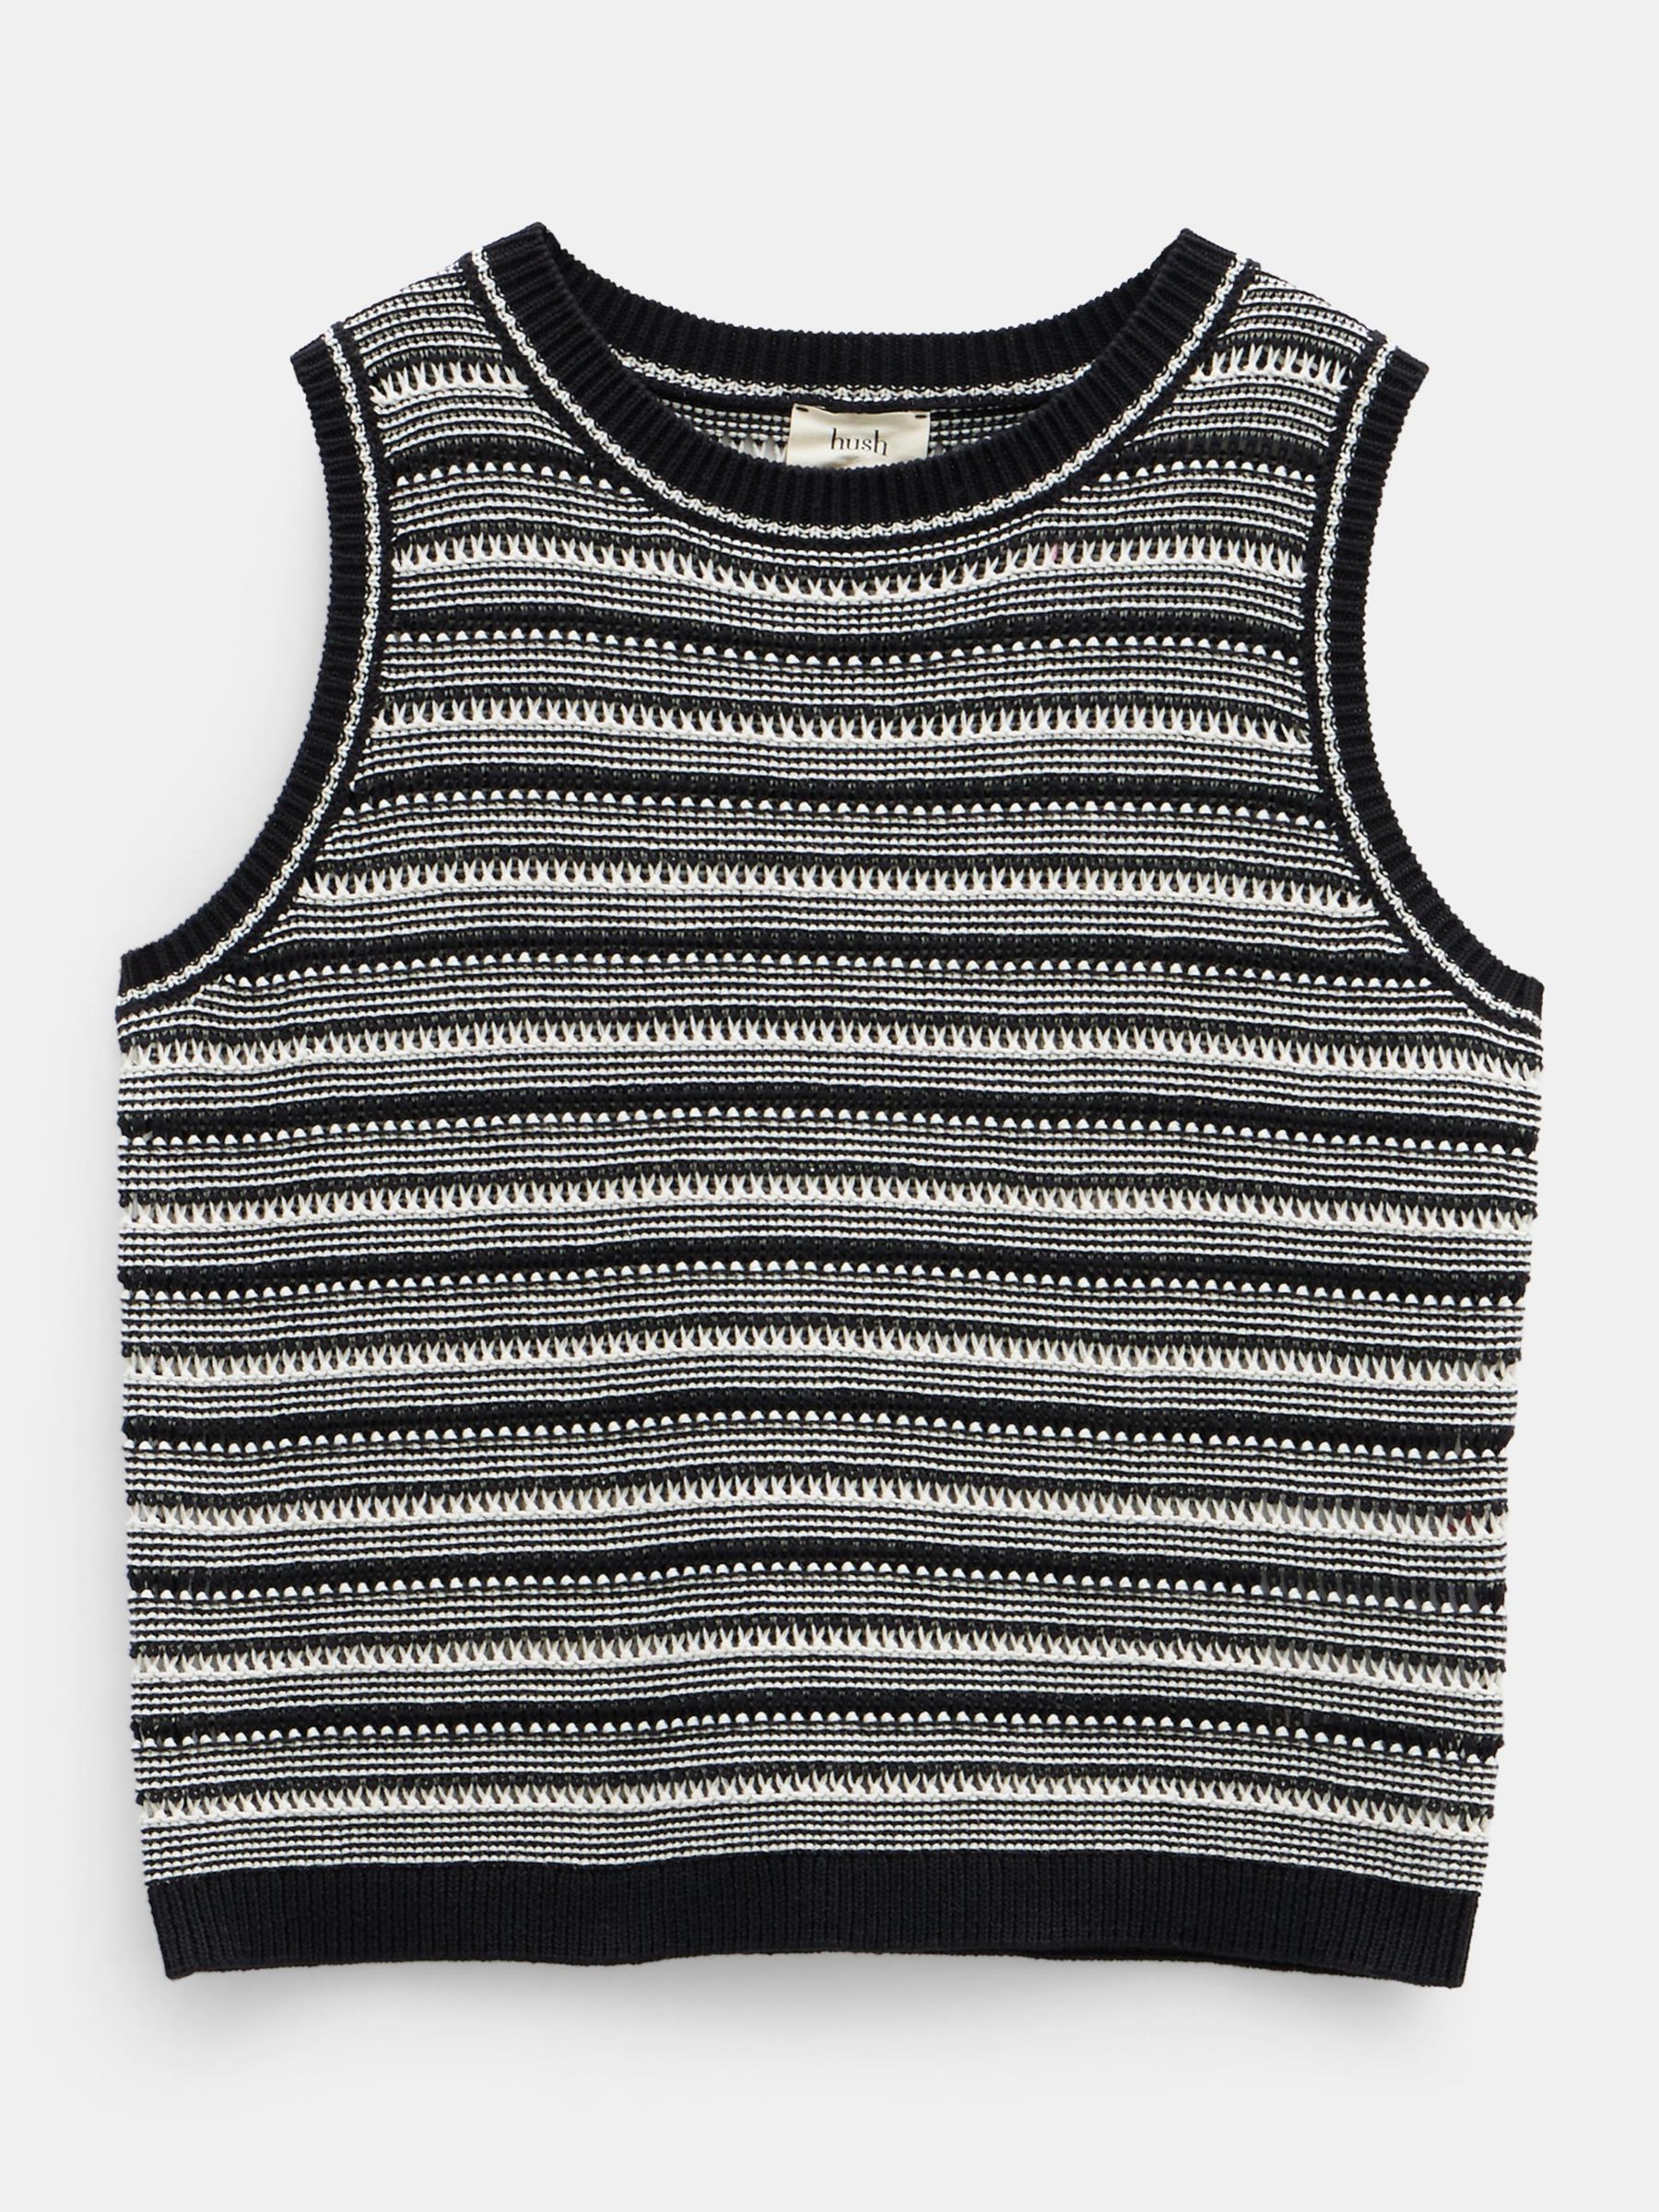 HUSH Shannon Textured Knitted Tank Top, Black/Soft White, M